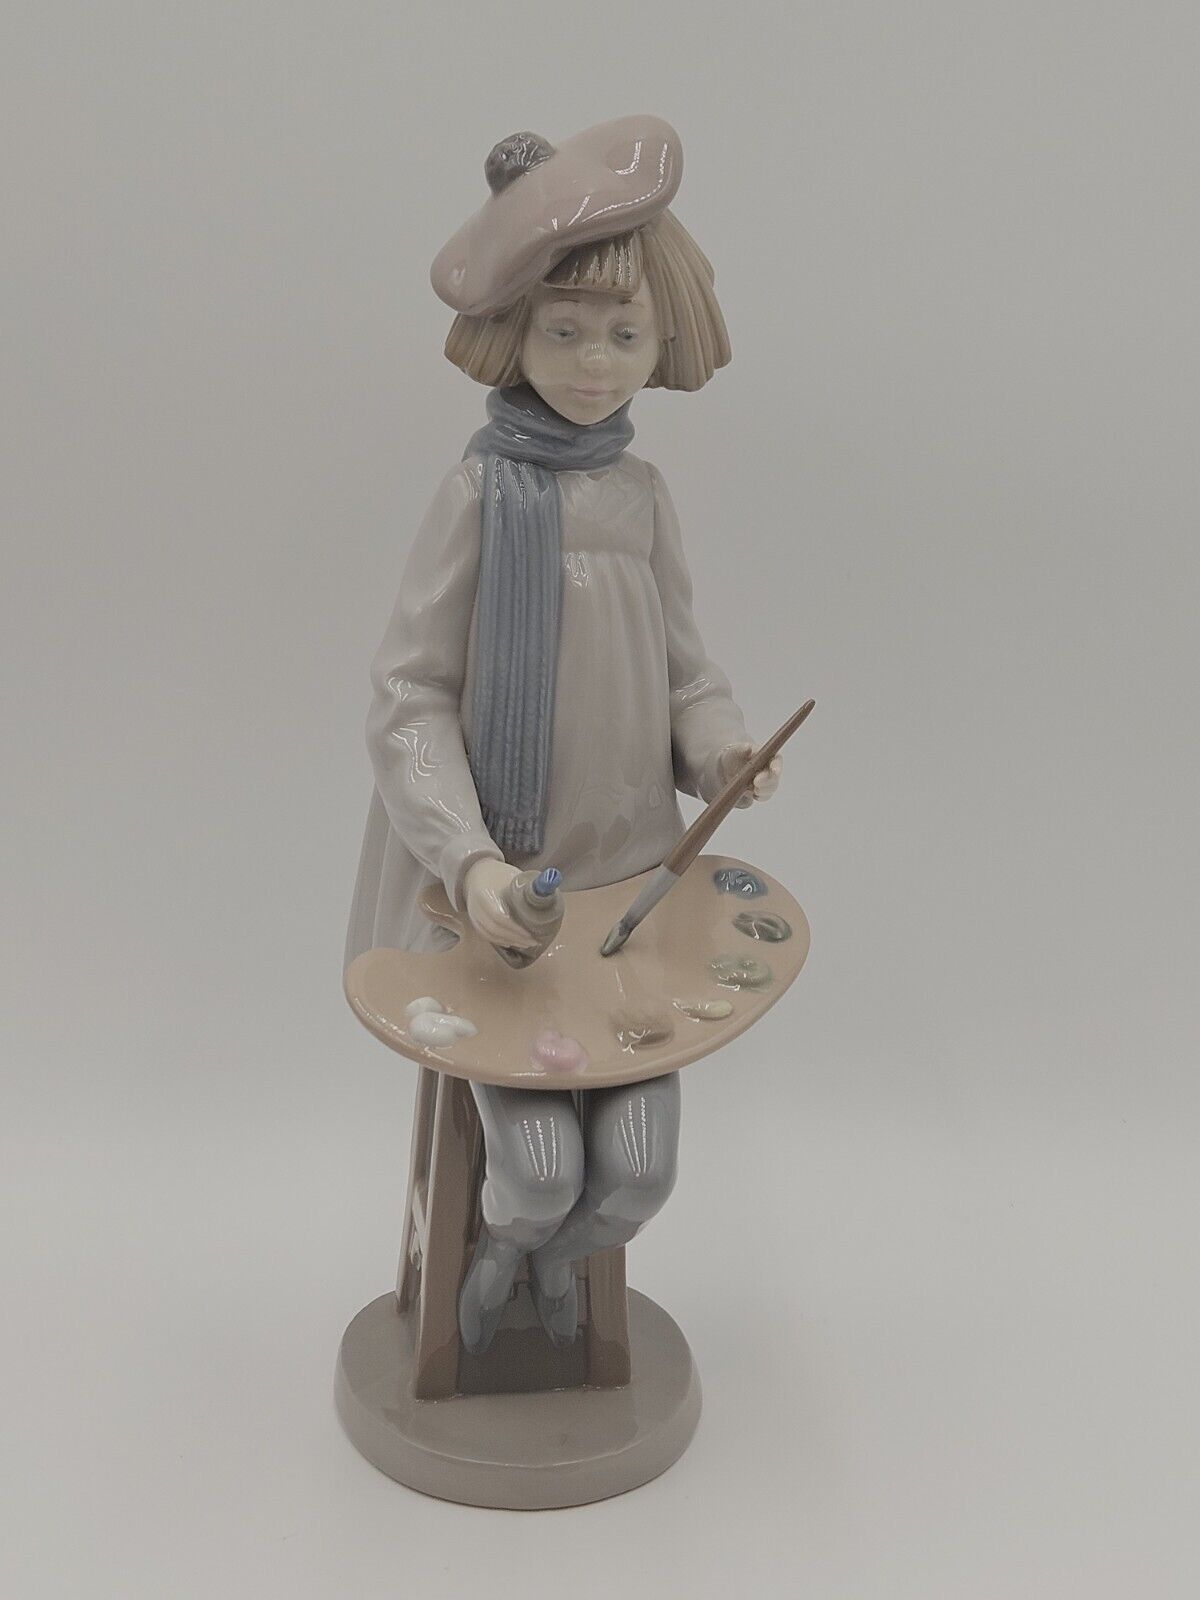 Nao By Lladro Artist With Paint Pallette Figurine Porcelain 13 Inch Retired 